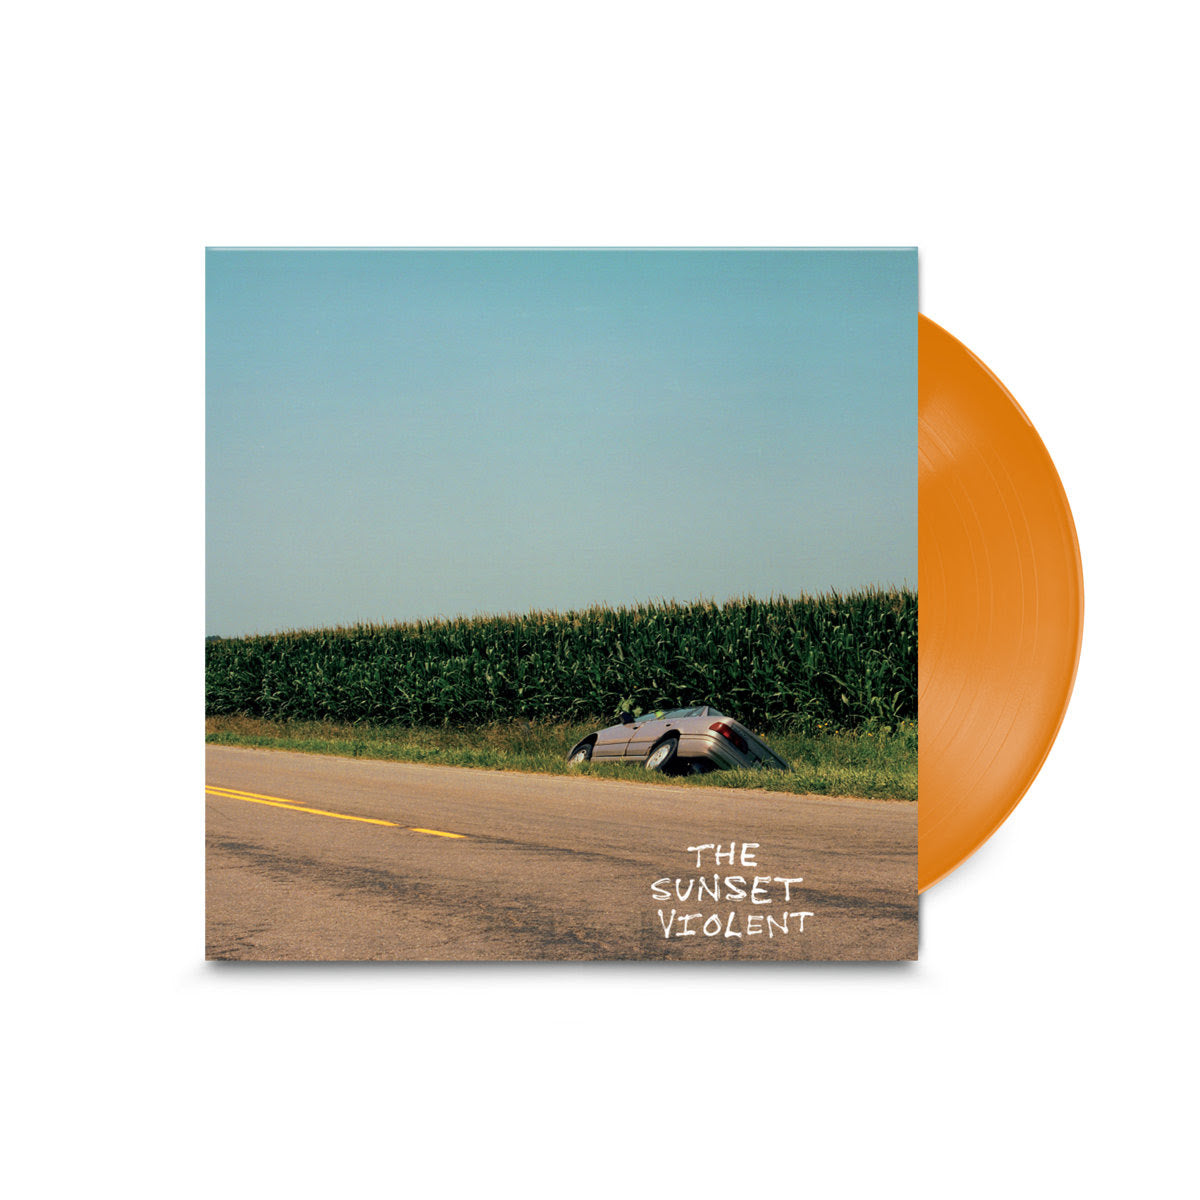 Mount Kimbie - The Sunset Violent | Buy the Vinyl LP from Flying Nun Records